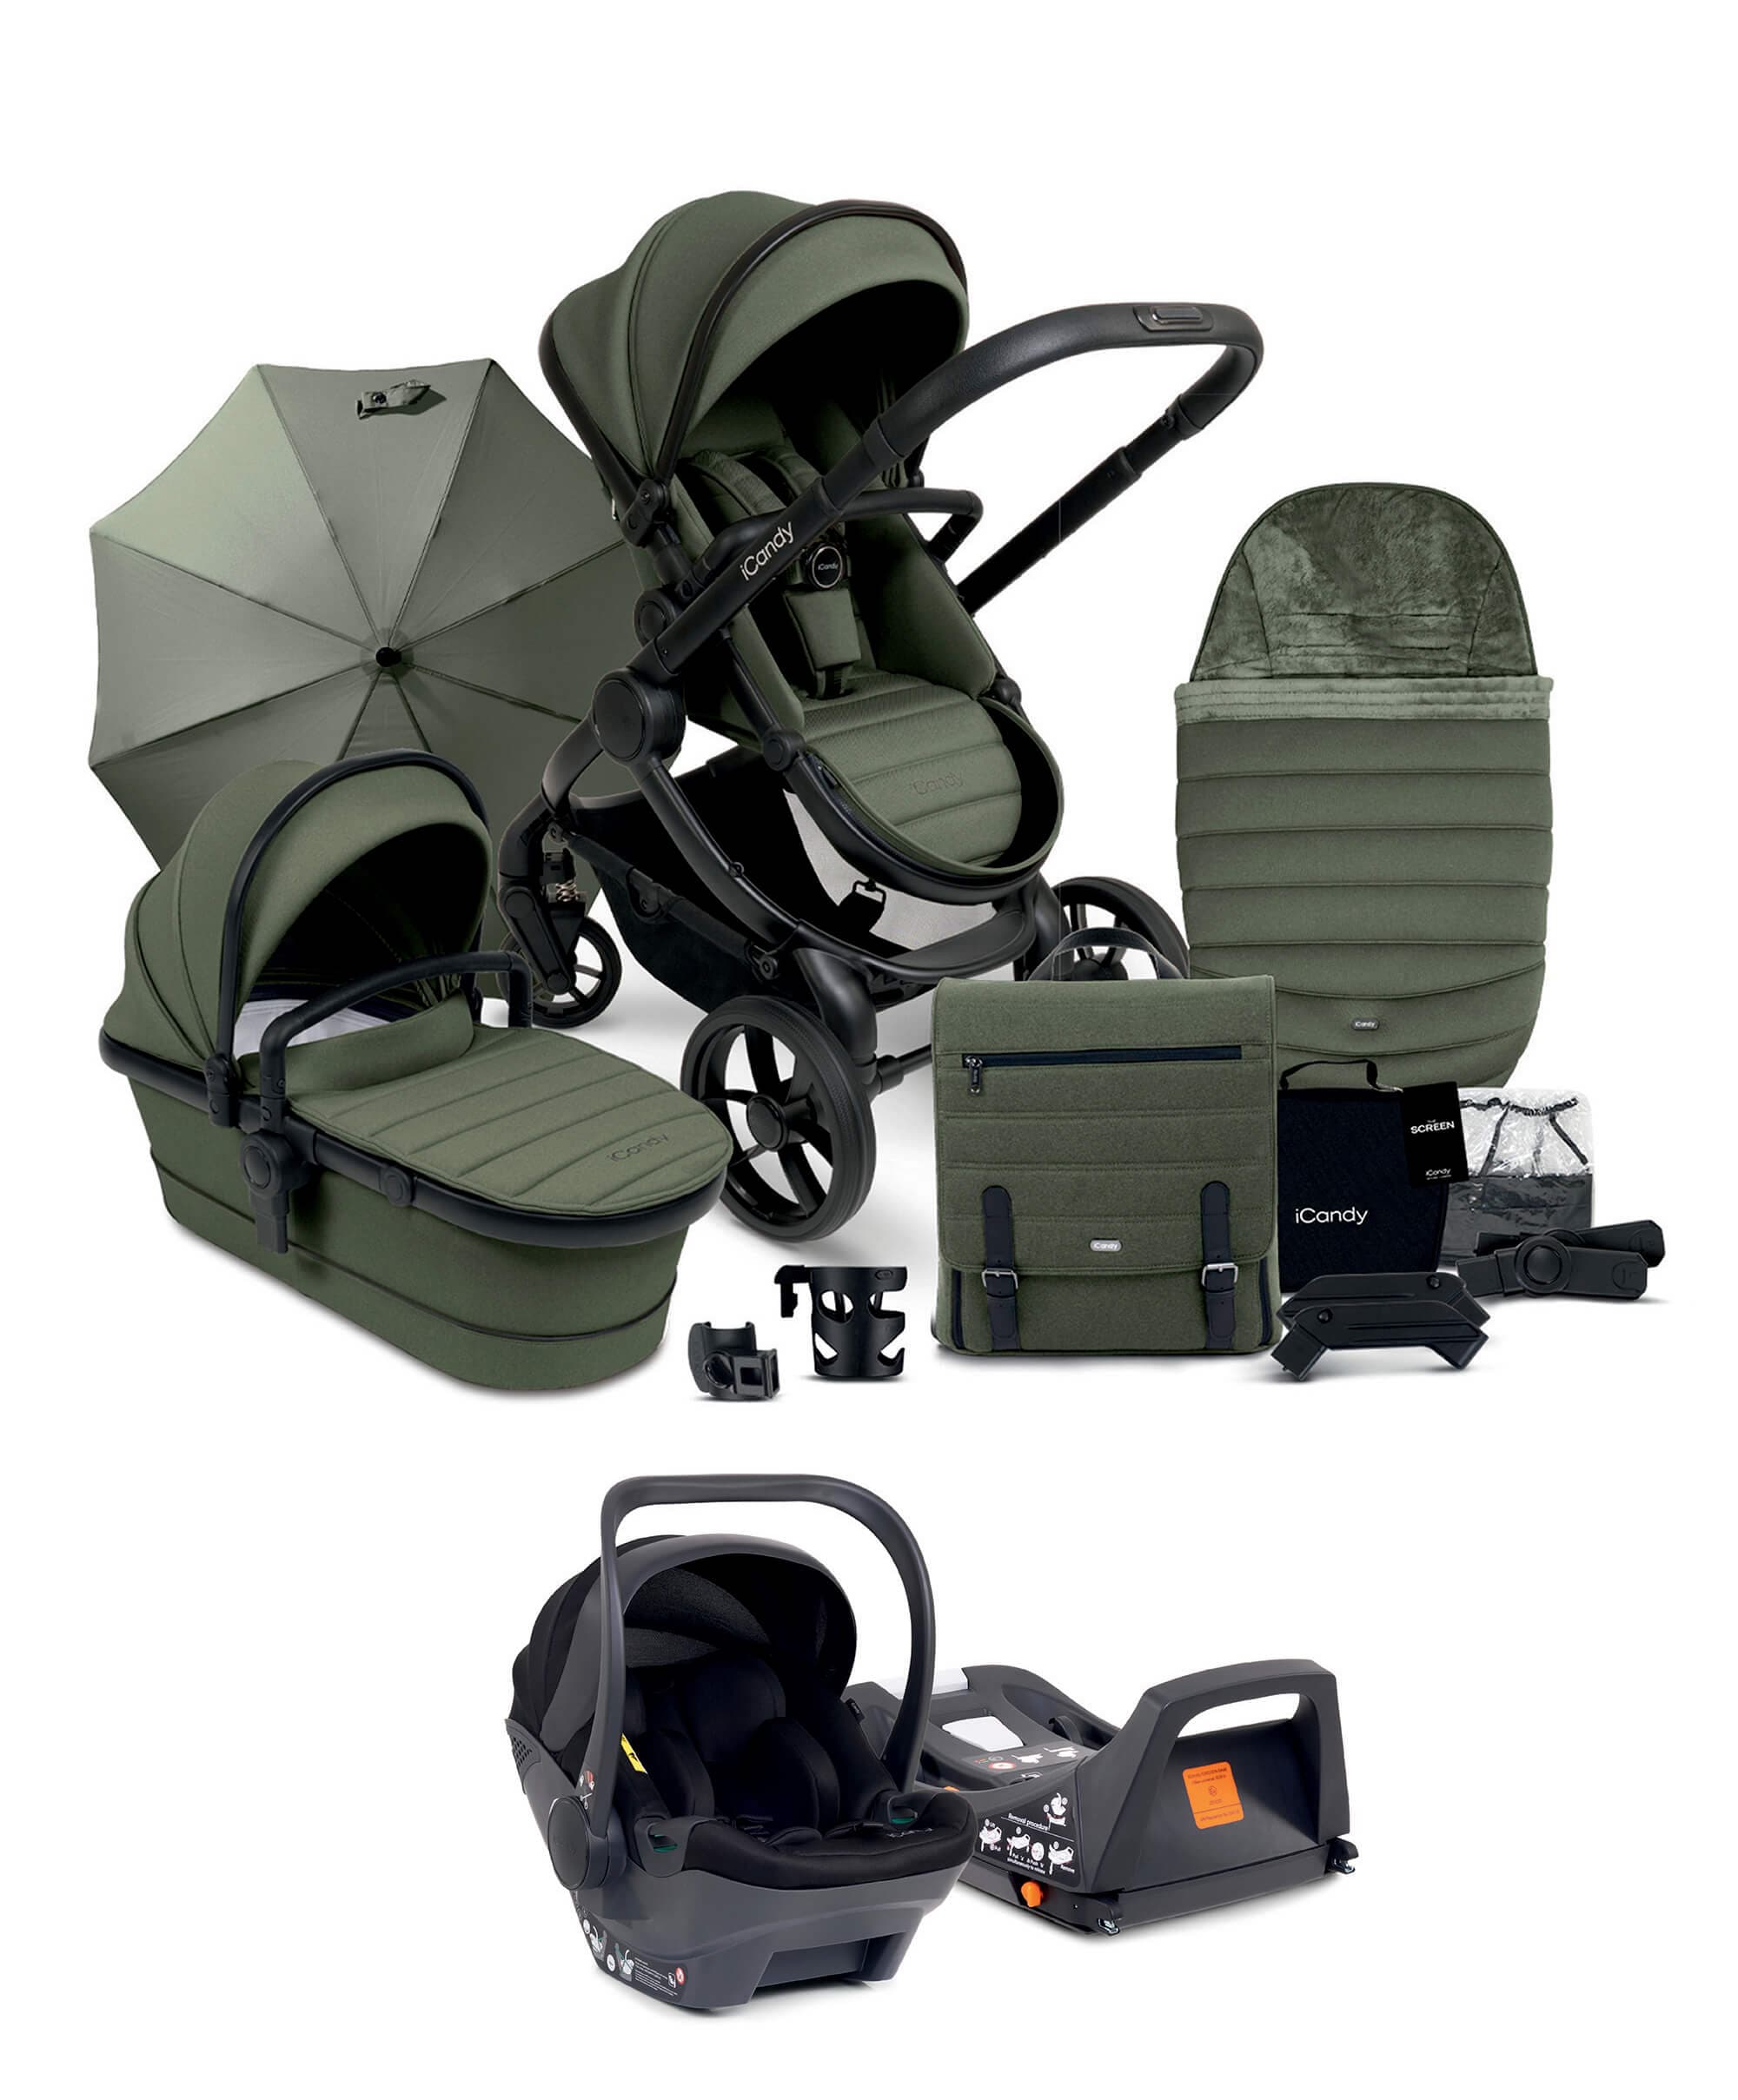 iCandy Peach 7 Complete Pushchair Bundle with Cocoon Car Seat - Ivy